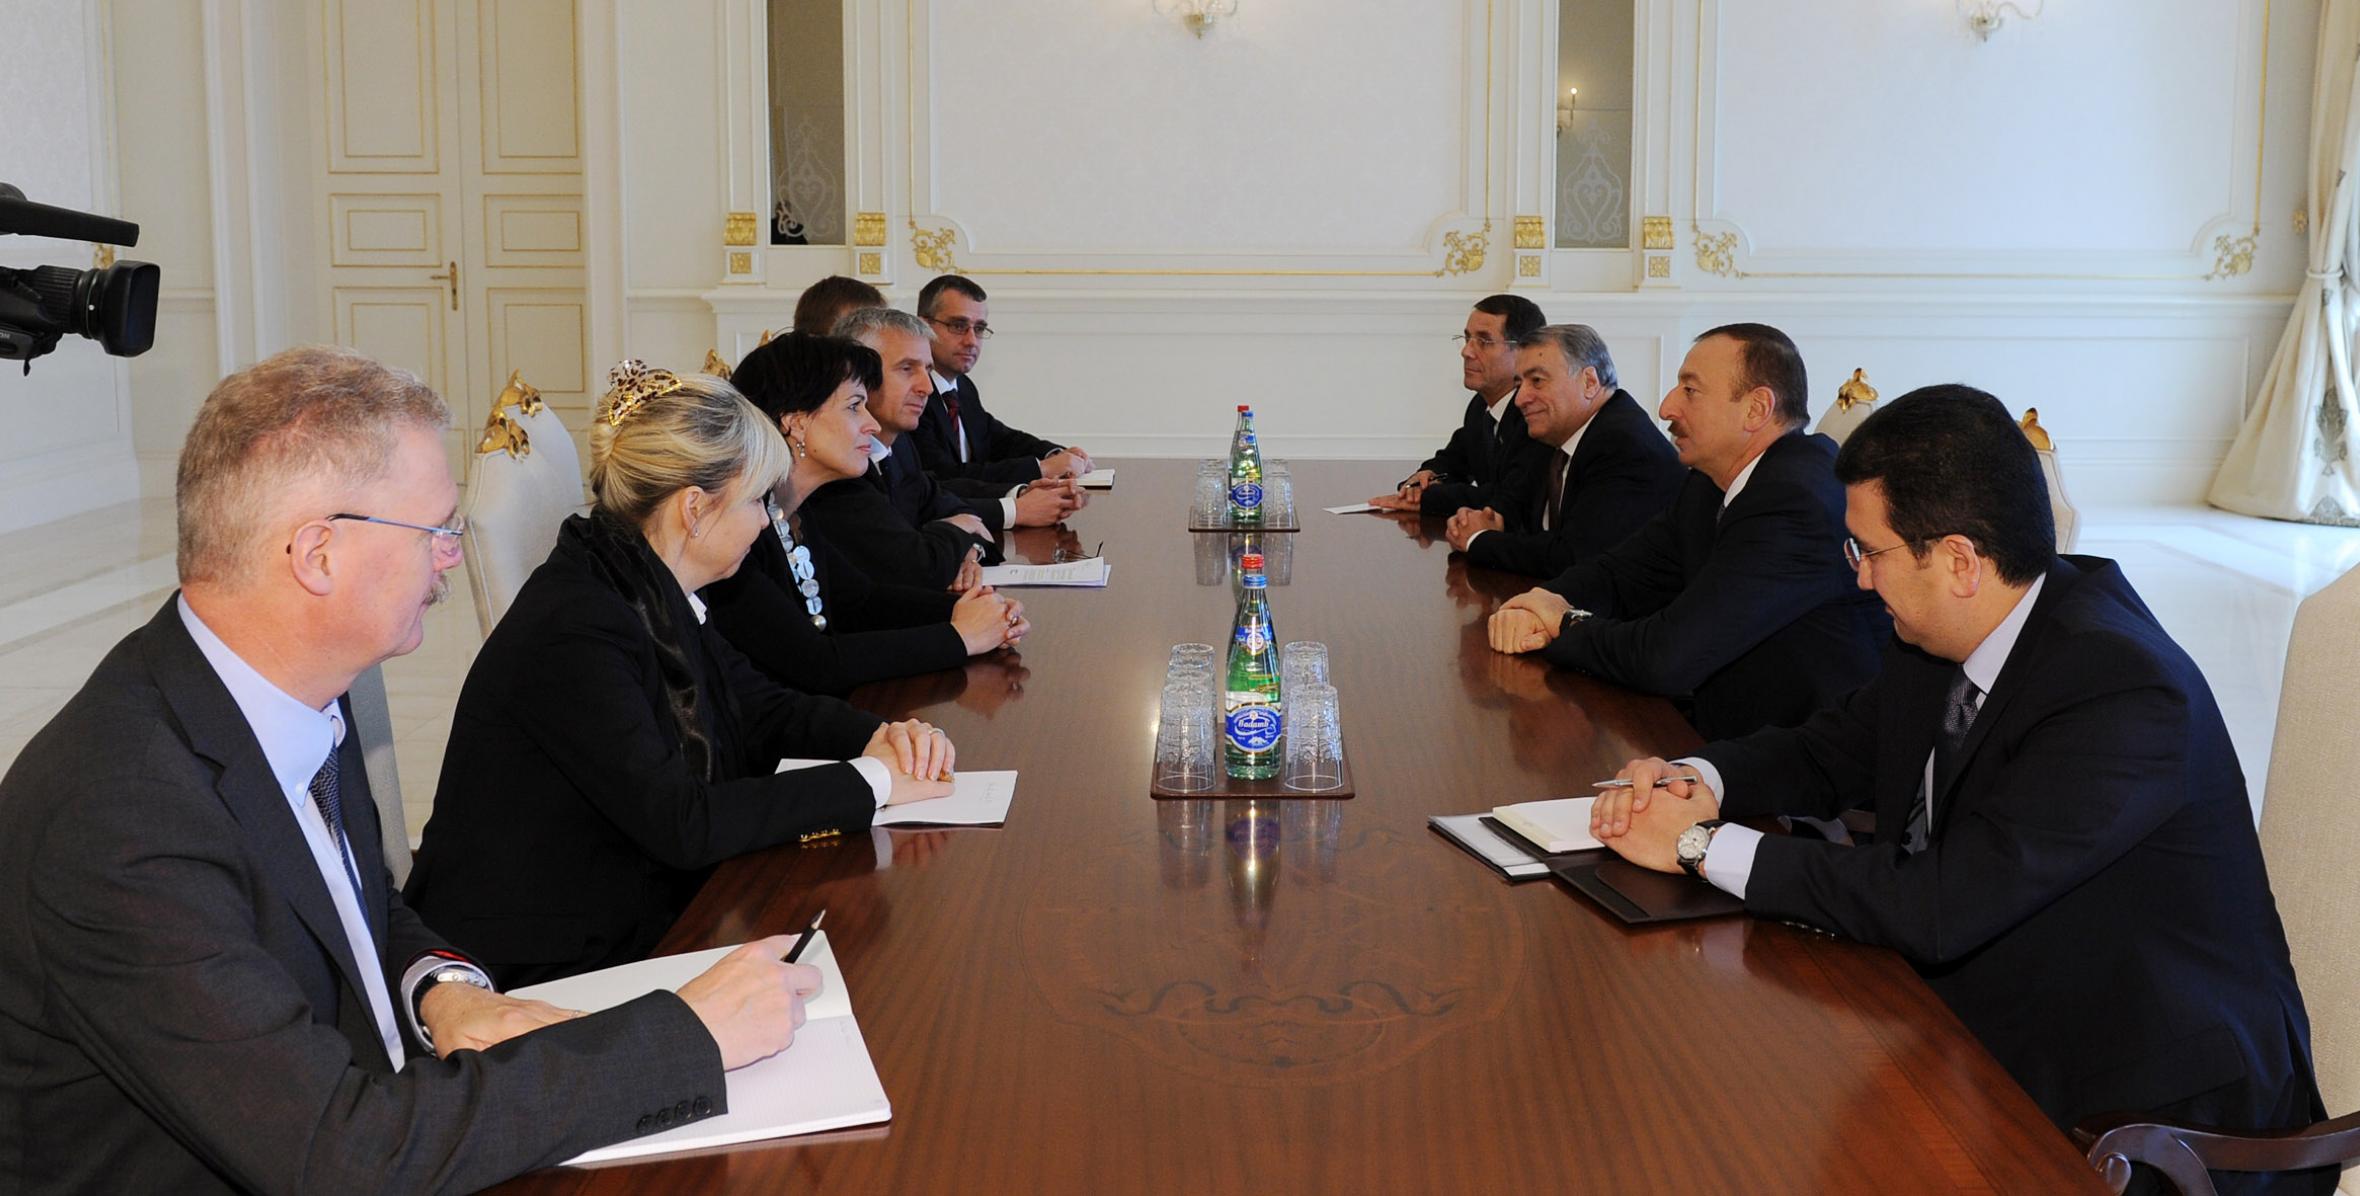 Ilham Aliyev received the minister of energy, environment, communication and transport of the Swiss Confederation